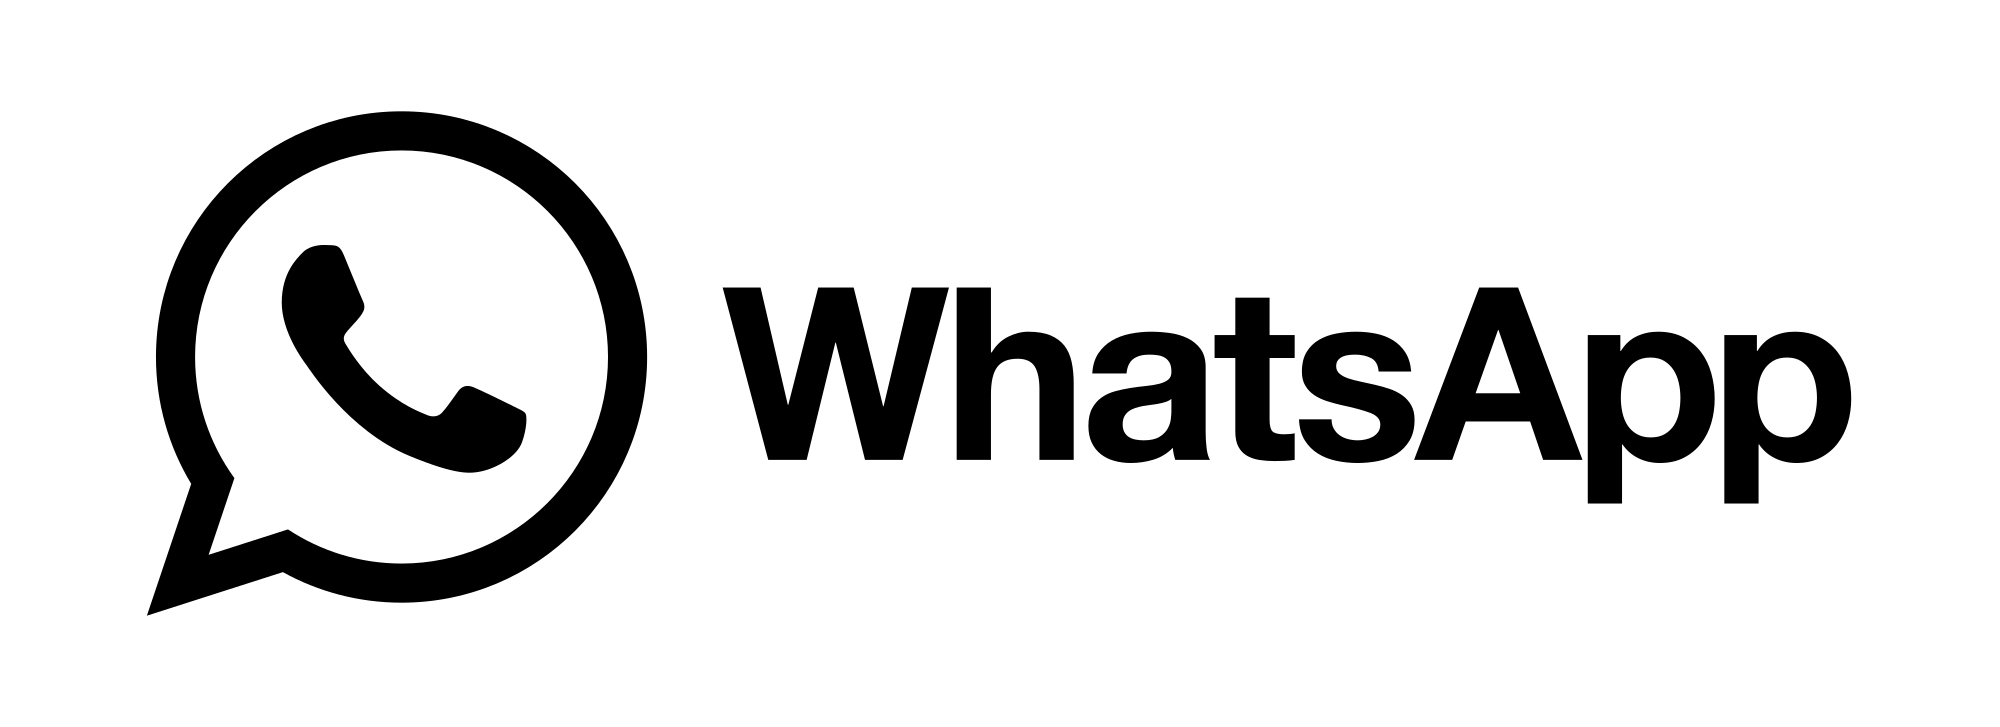 Whatsapp Logo and Brand Icons PNG.